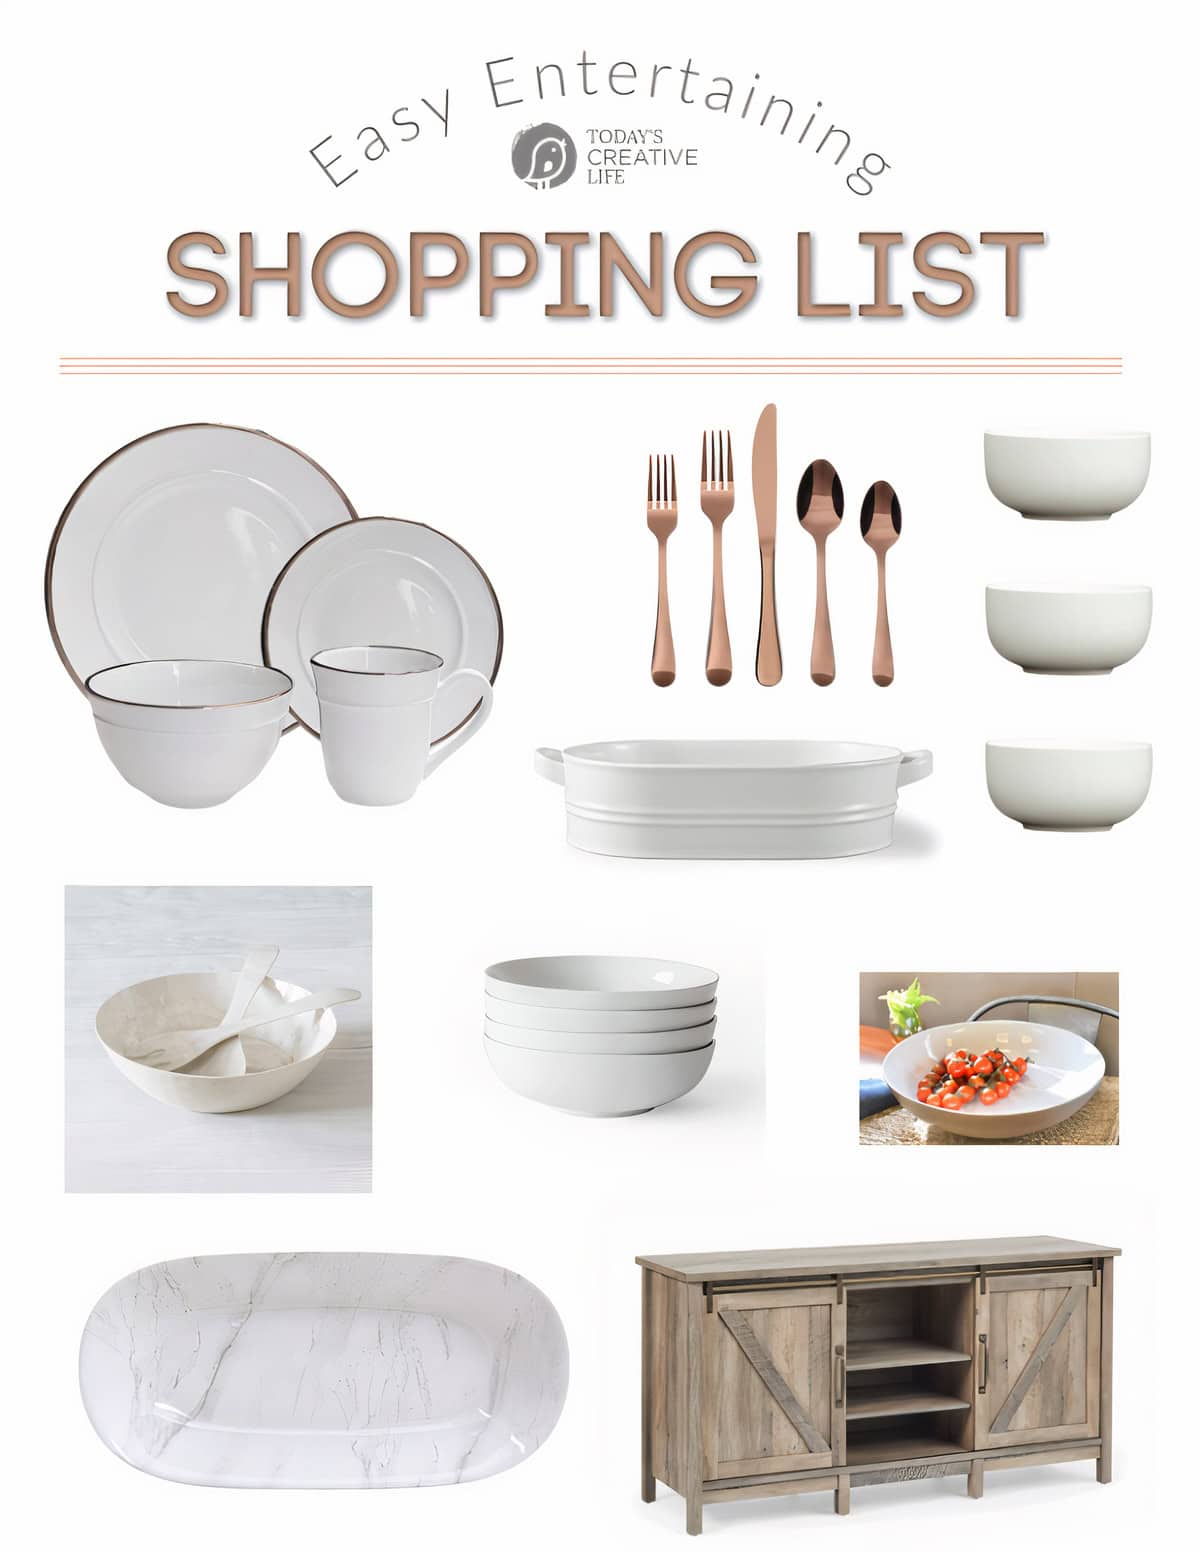 Where to Find White Serve ware for Entertaining